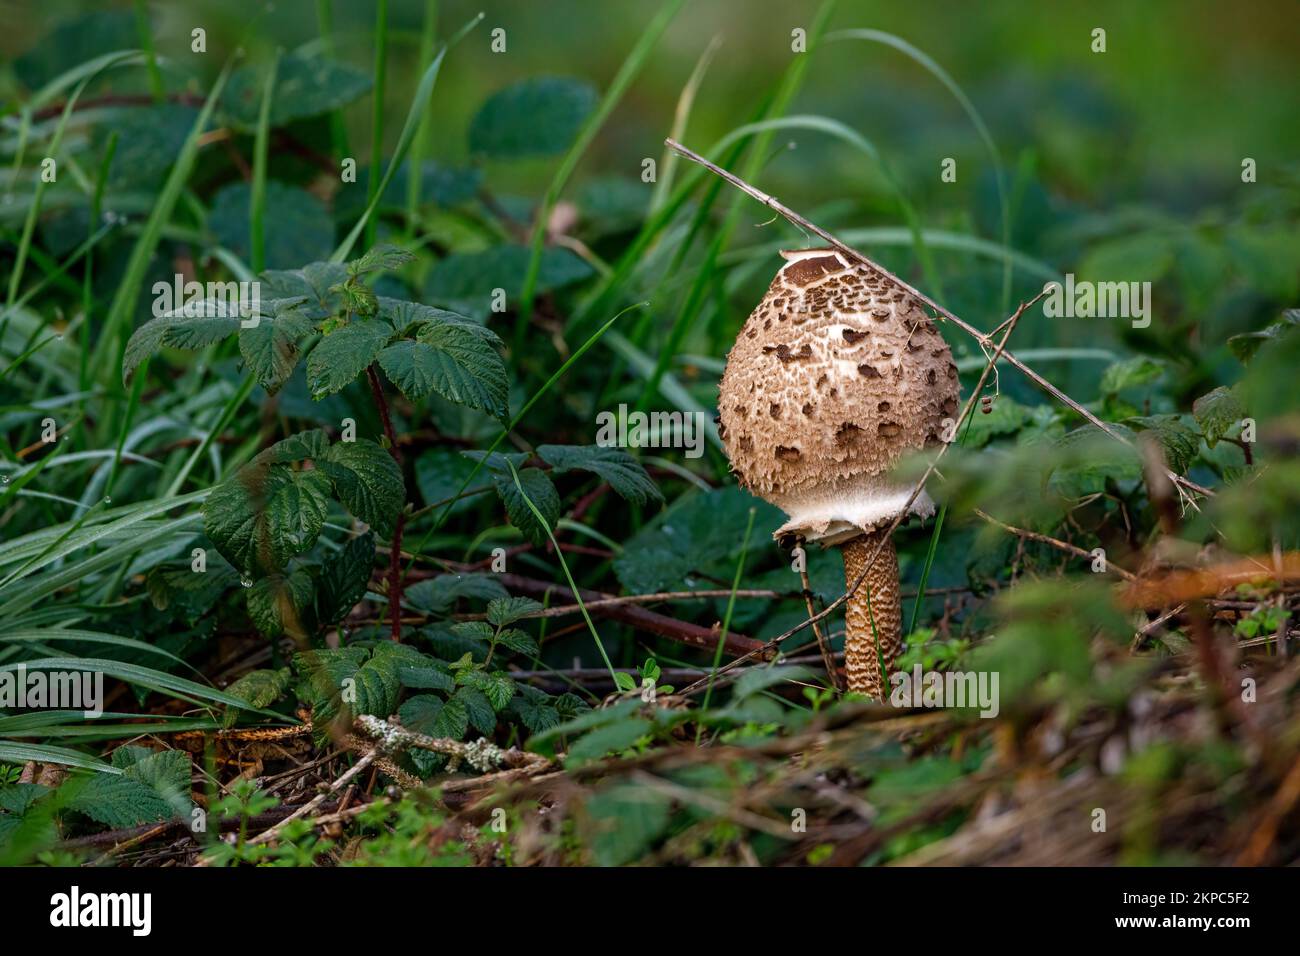 An edible parasol mushroom in the forest Stock Photo